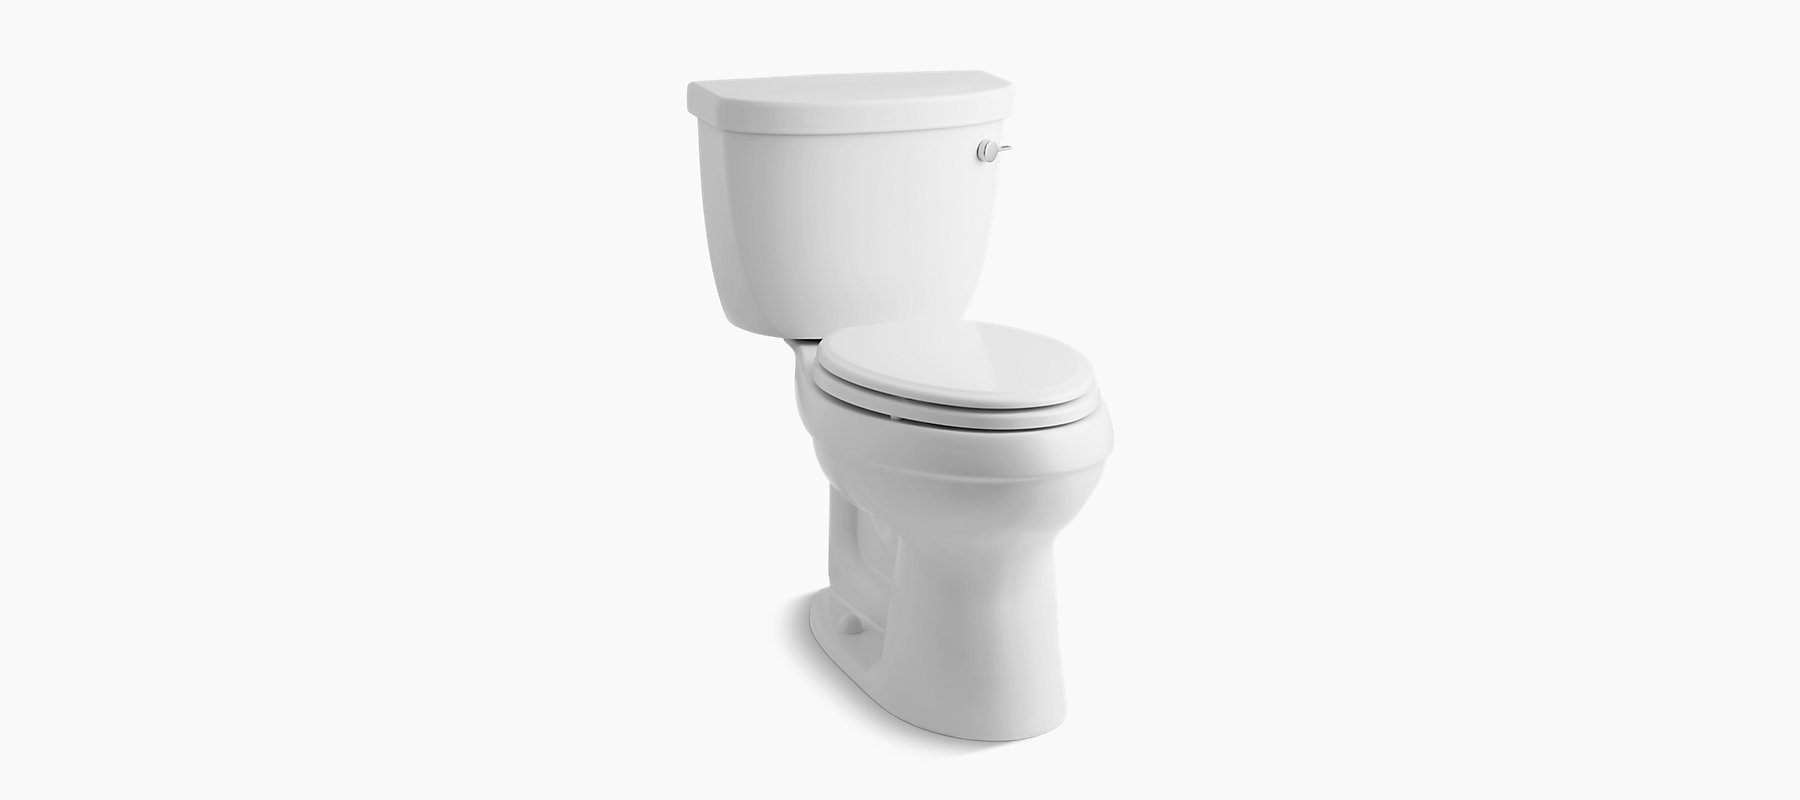 Less Seat Biscuit KOHLER K-3589-RA-96 Cimarron Comfort Height Elongated Toilet with Class Five Technology and Right-Hand Trip Lever 